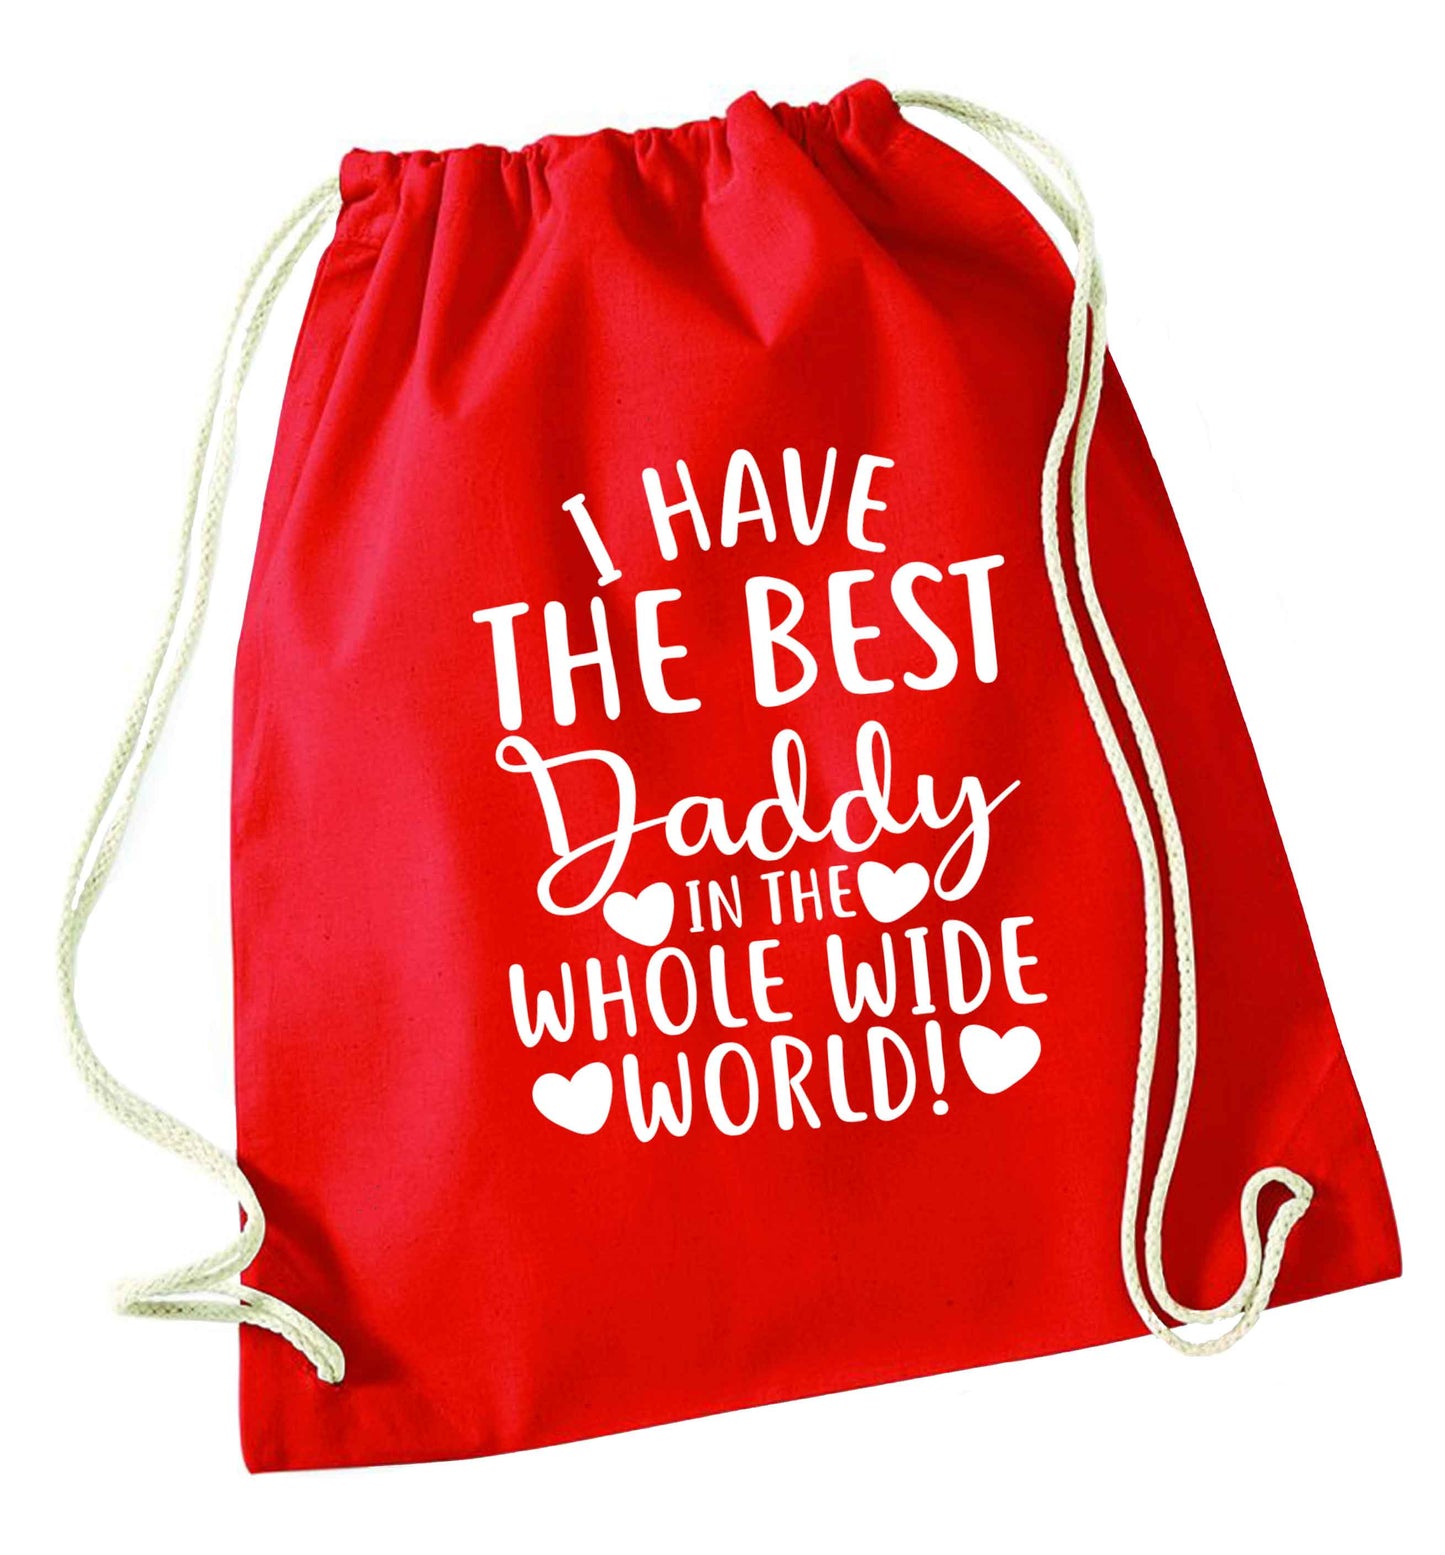 I have the best daddy in the whole wide world red drawstring bag 